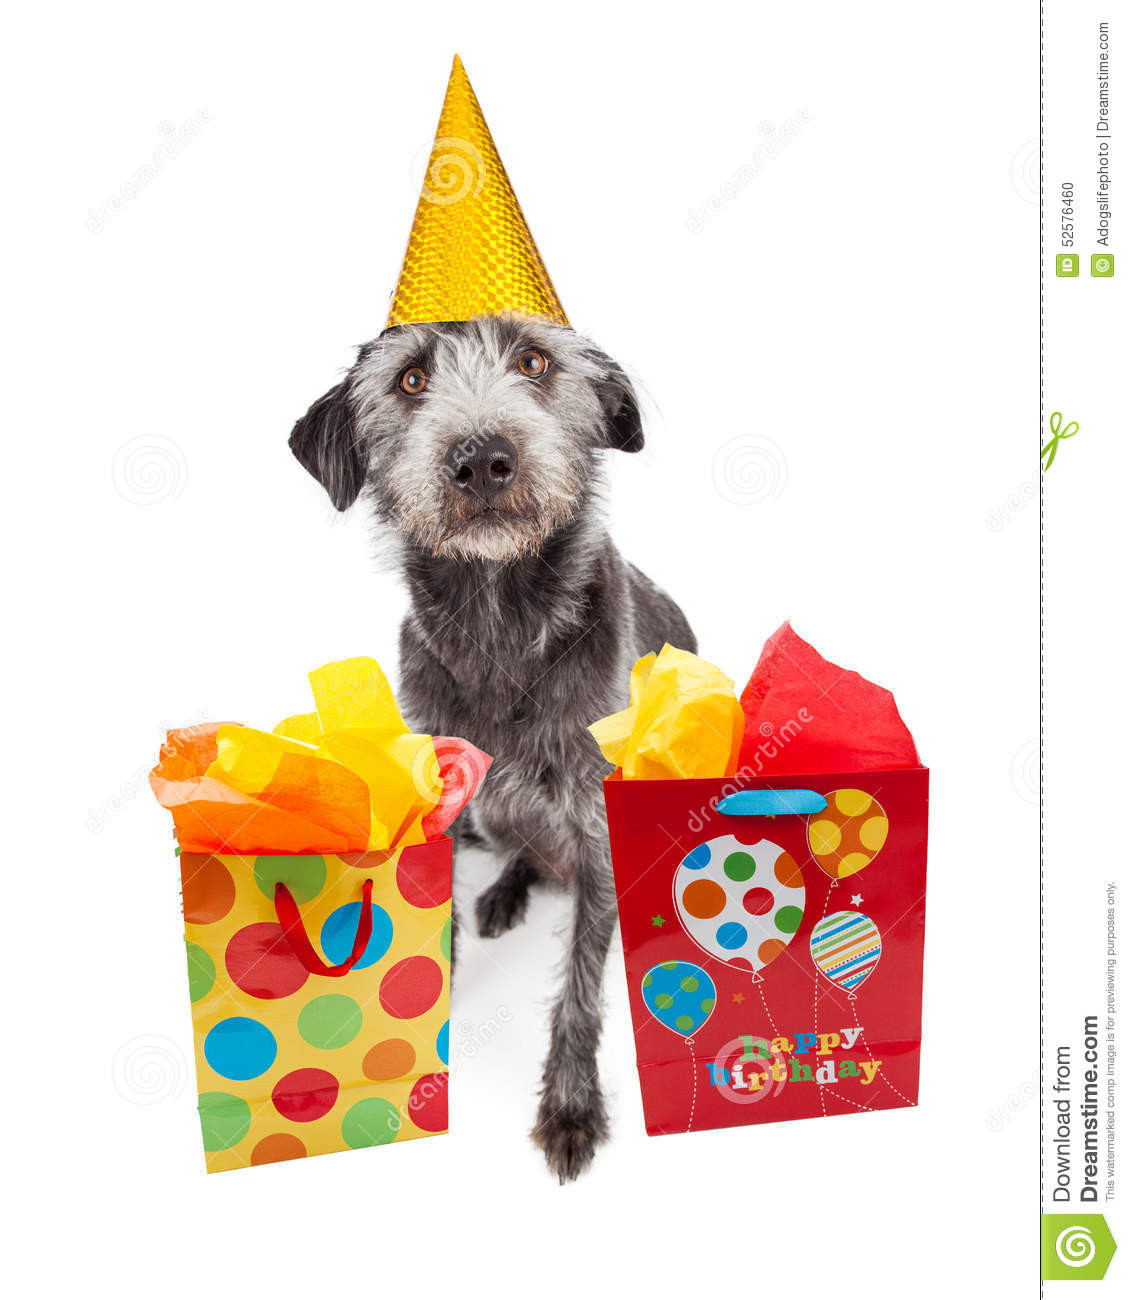 Dog Birthday Gifts
 Dog Wearing Party Hat With Birthday Gifts Stock